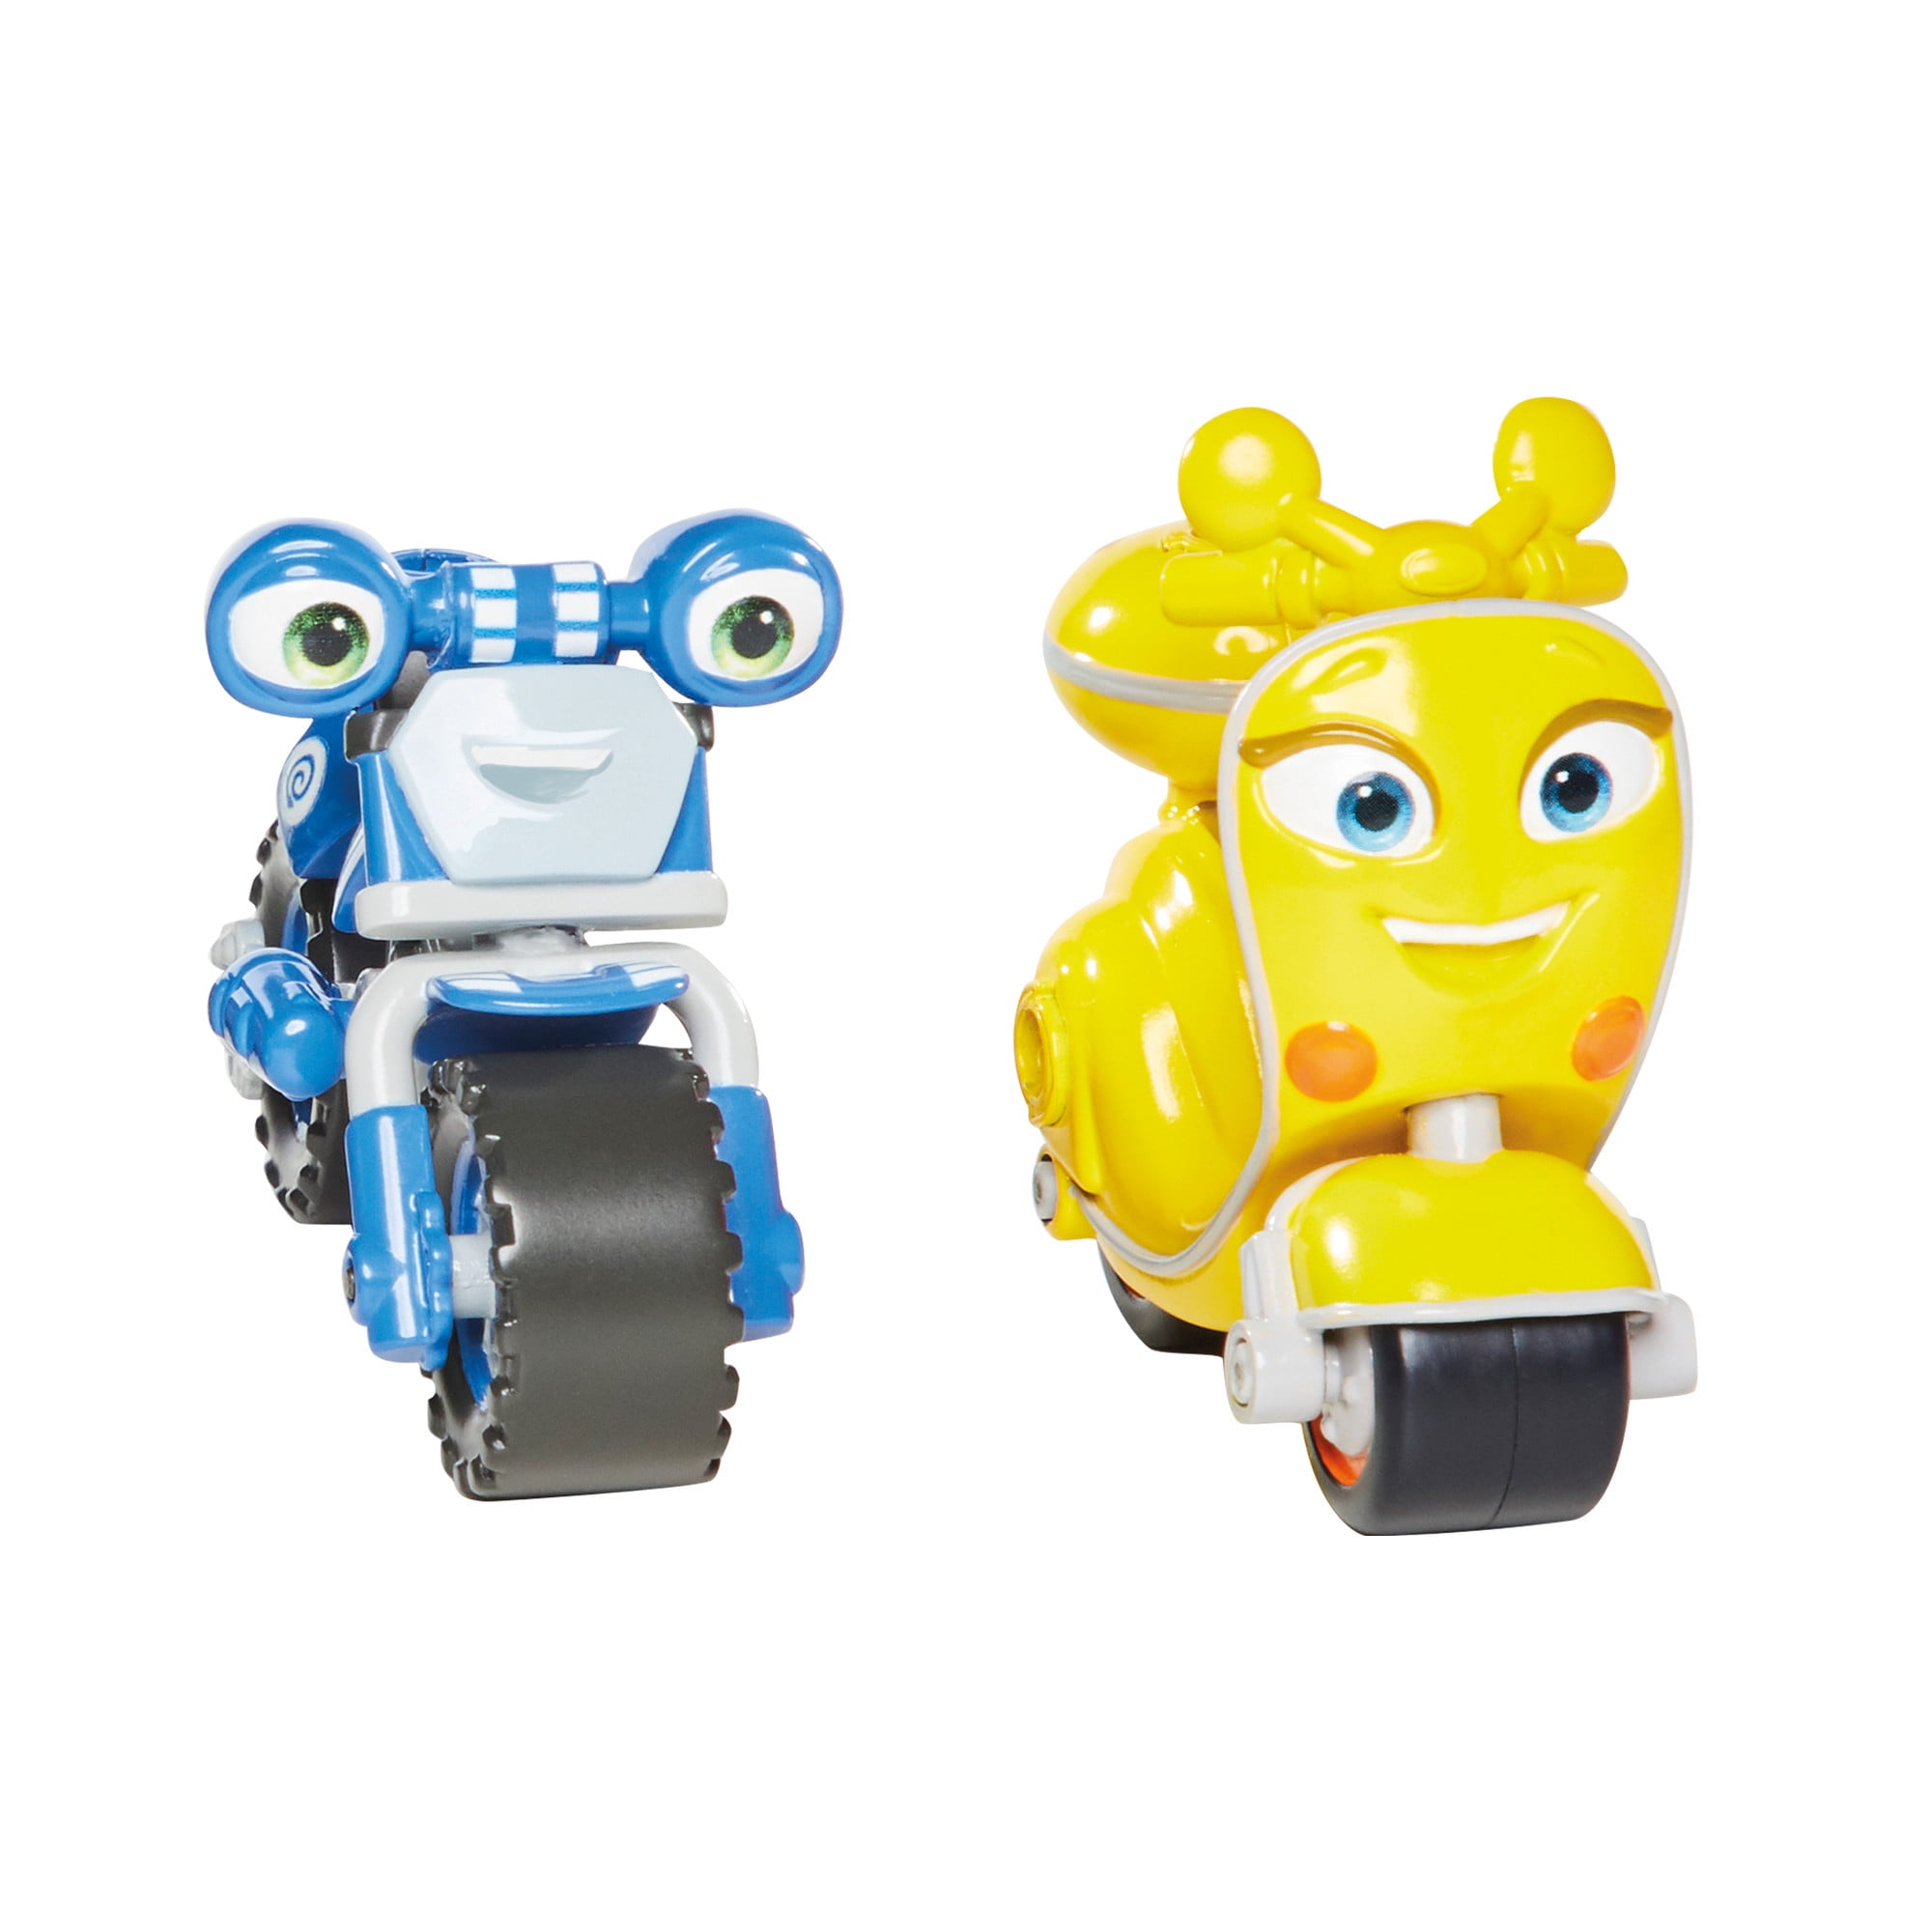 Ricky Zoom: Loop & Scootio 2 Pack – 3-inch Action Figures – Free-Wheeling,  Free Standing Toy Bikes for Preschool Play 